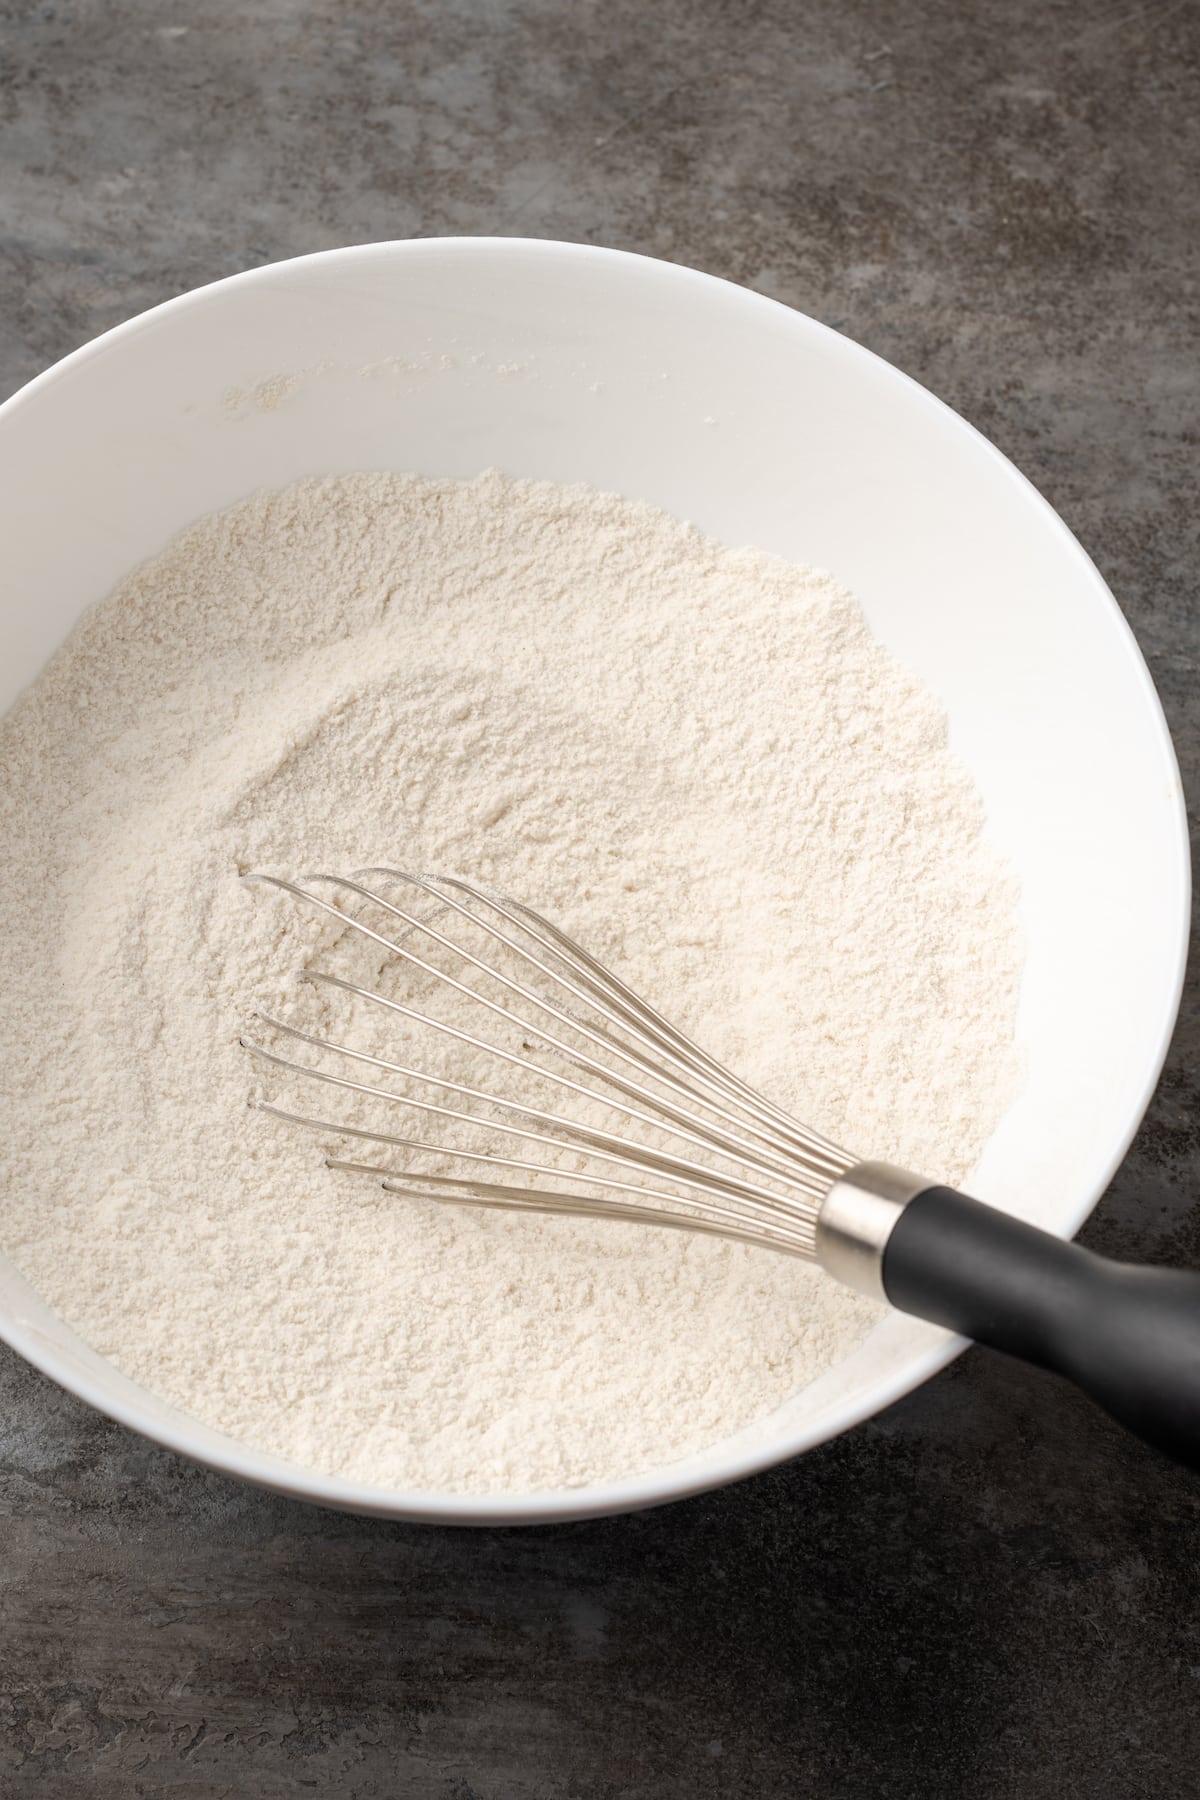 Dry ingredients whisked together in a mixing bowl.